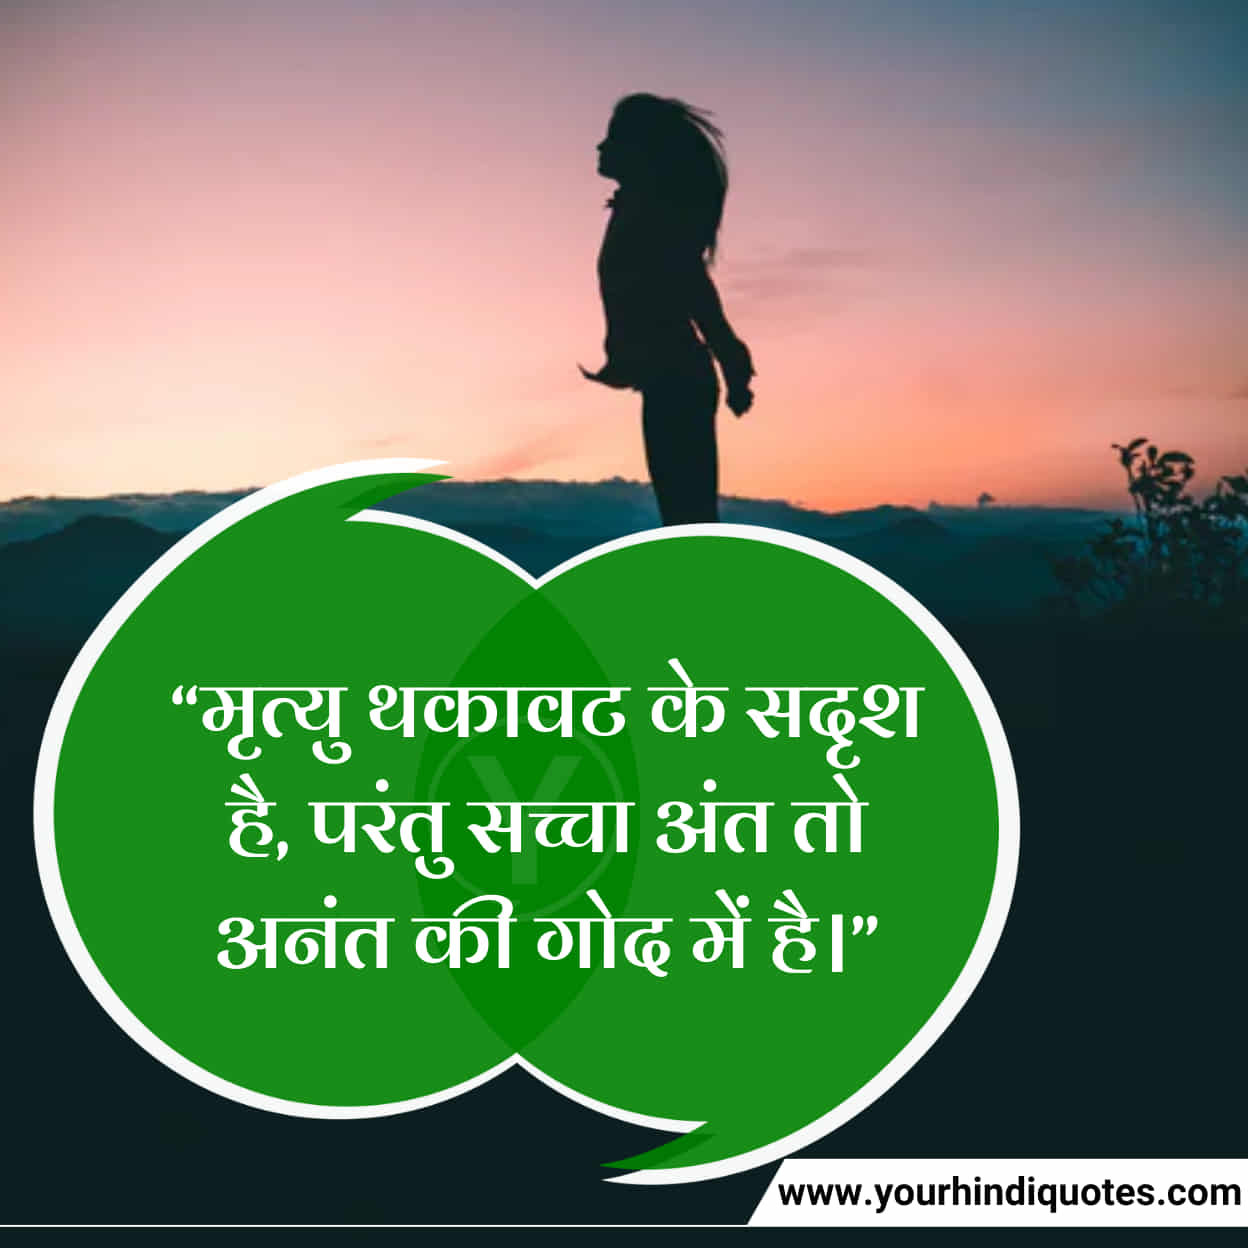 Emotional Death Quotes in Hindi